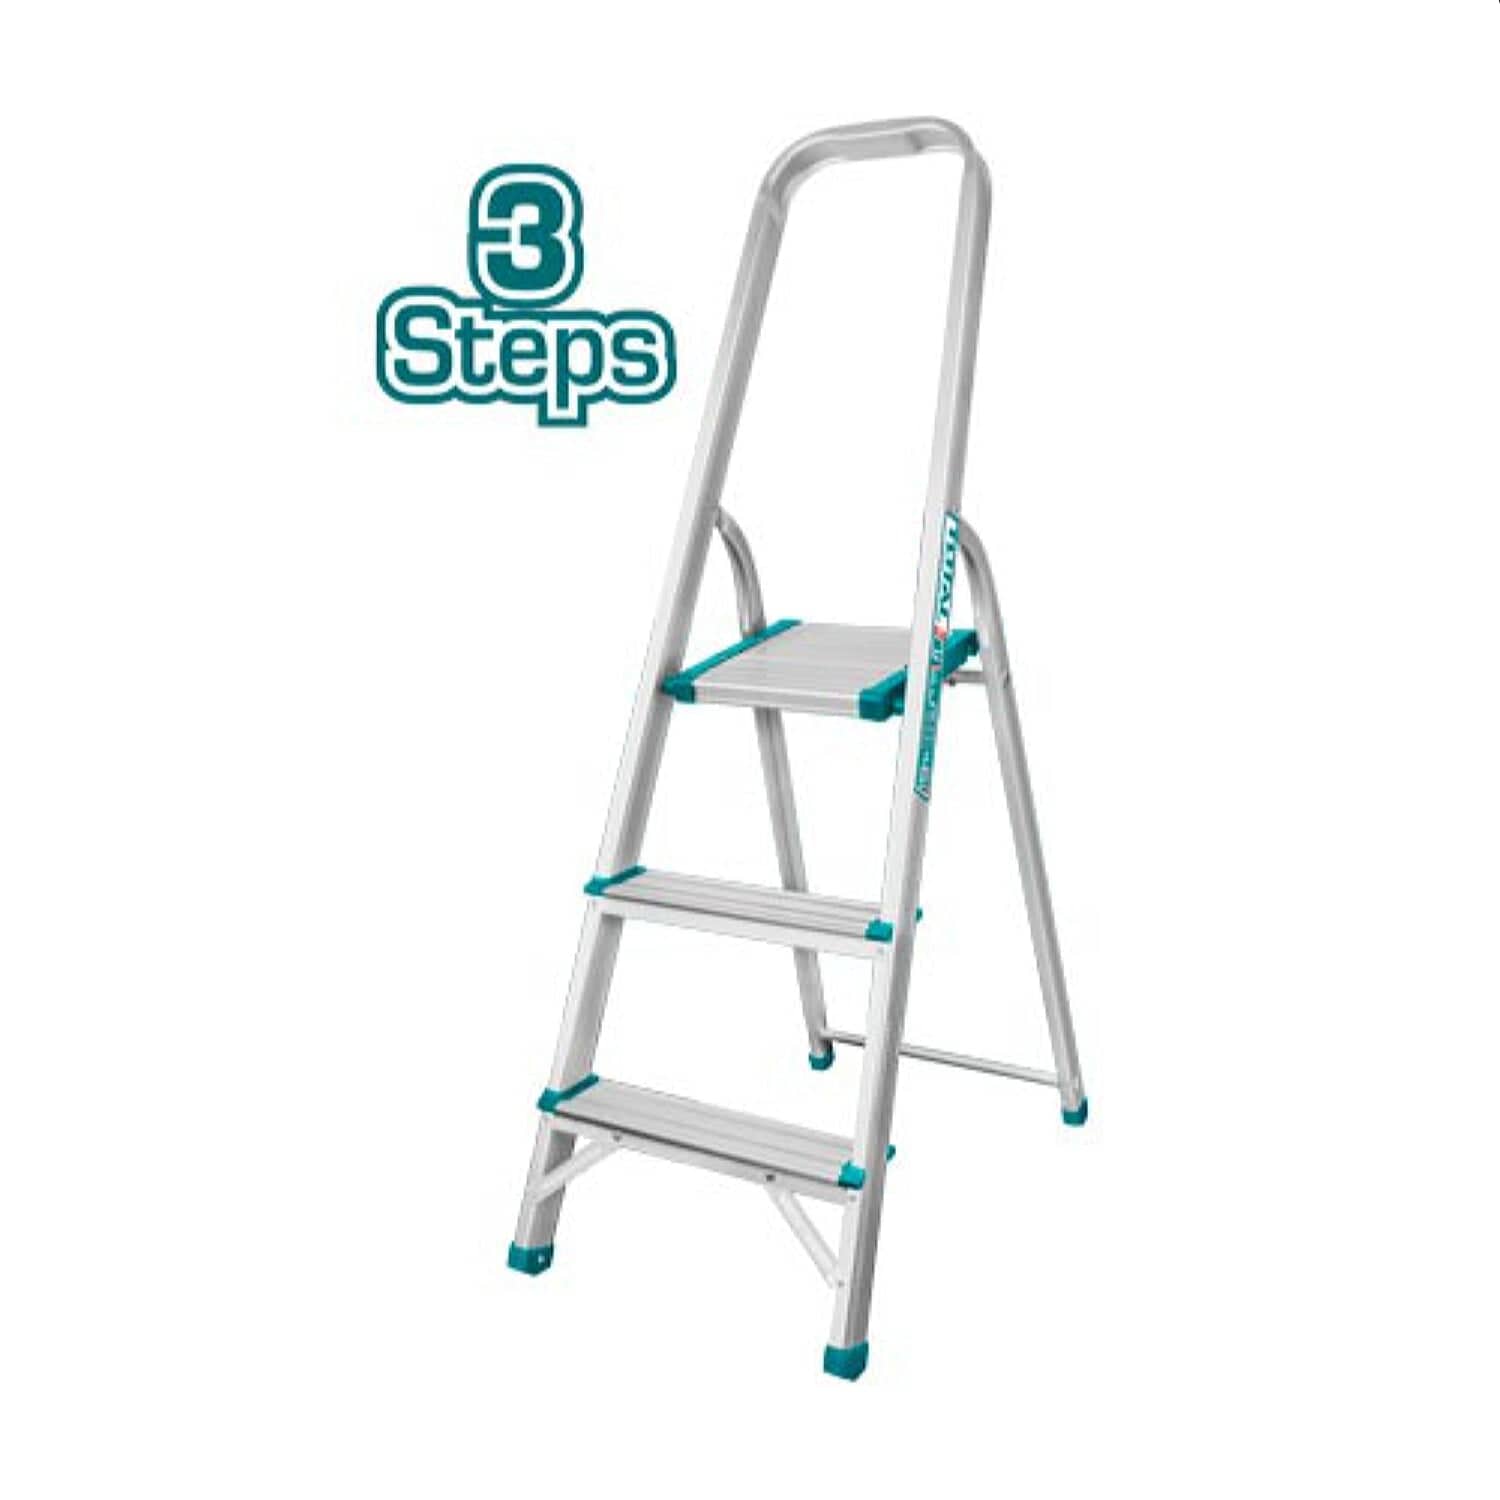 Total Household Ladder | Supply Master | Accra, Ghana Ladder Buy Tools hardware Building materials